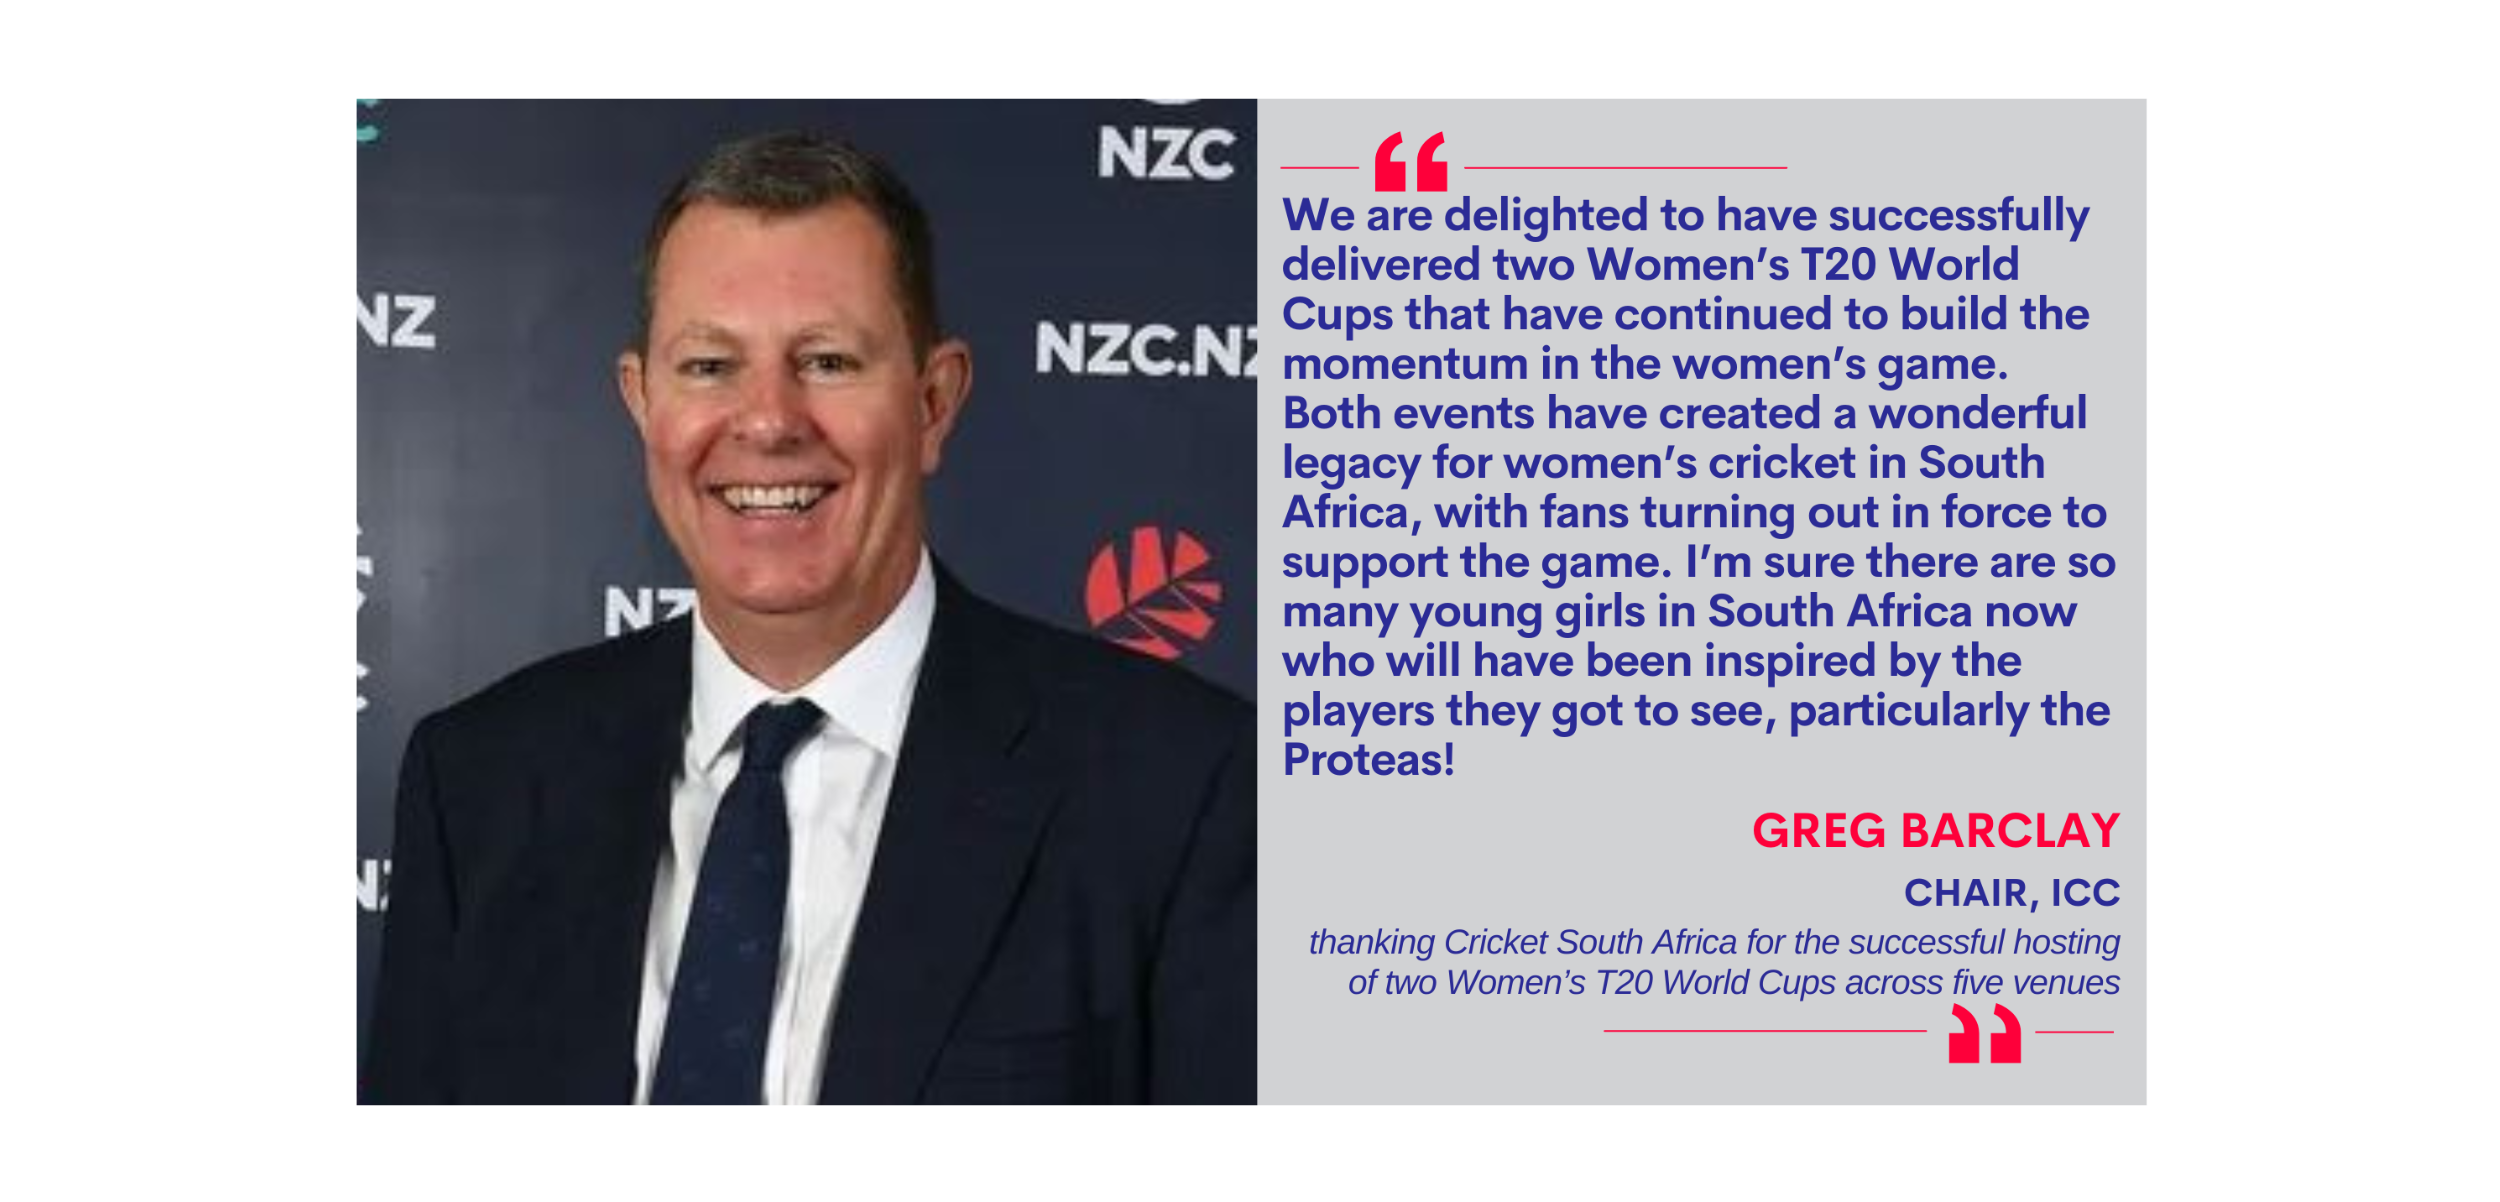 Greg Barclay, Chair, ICC on March 5, 2023